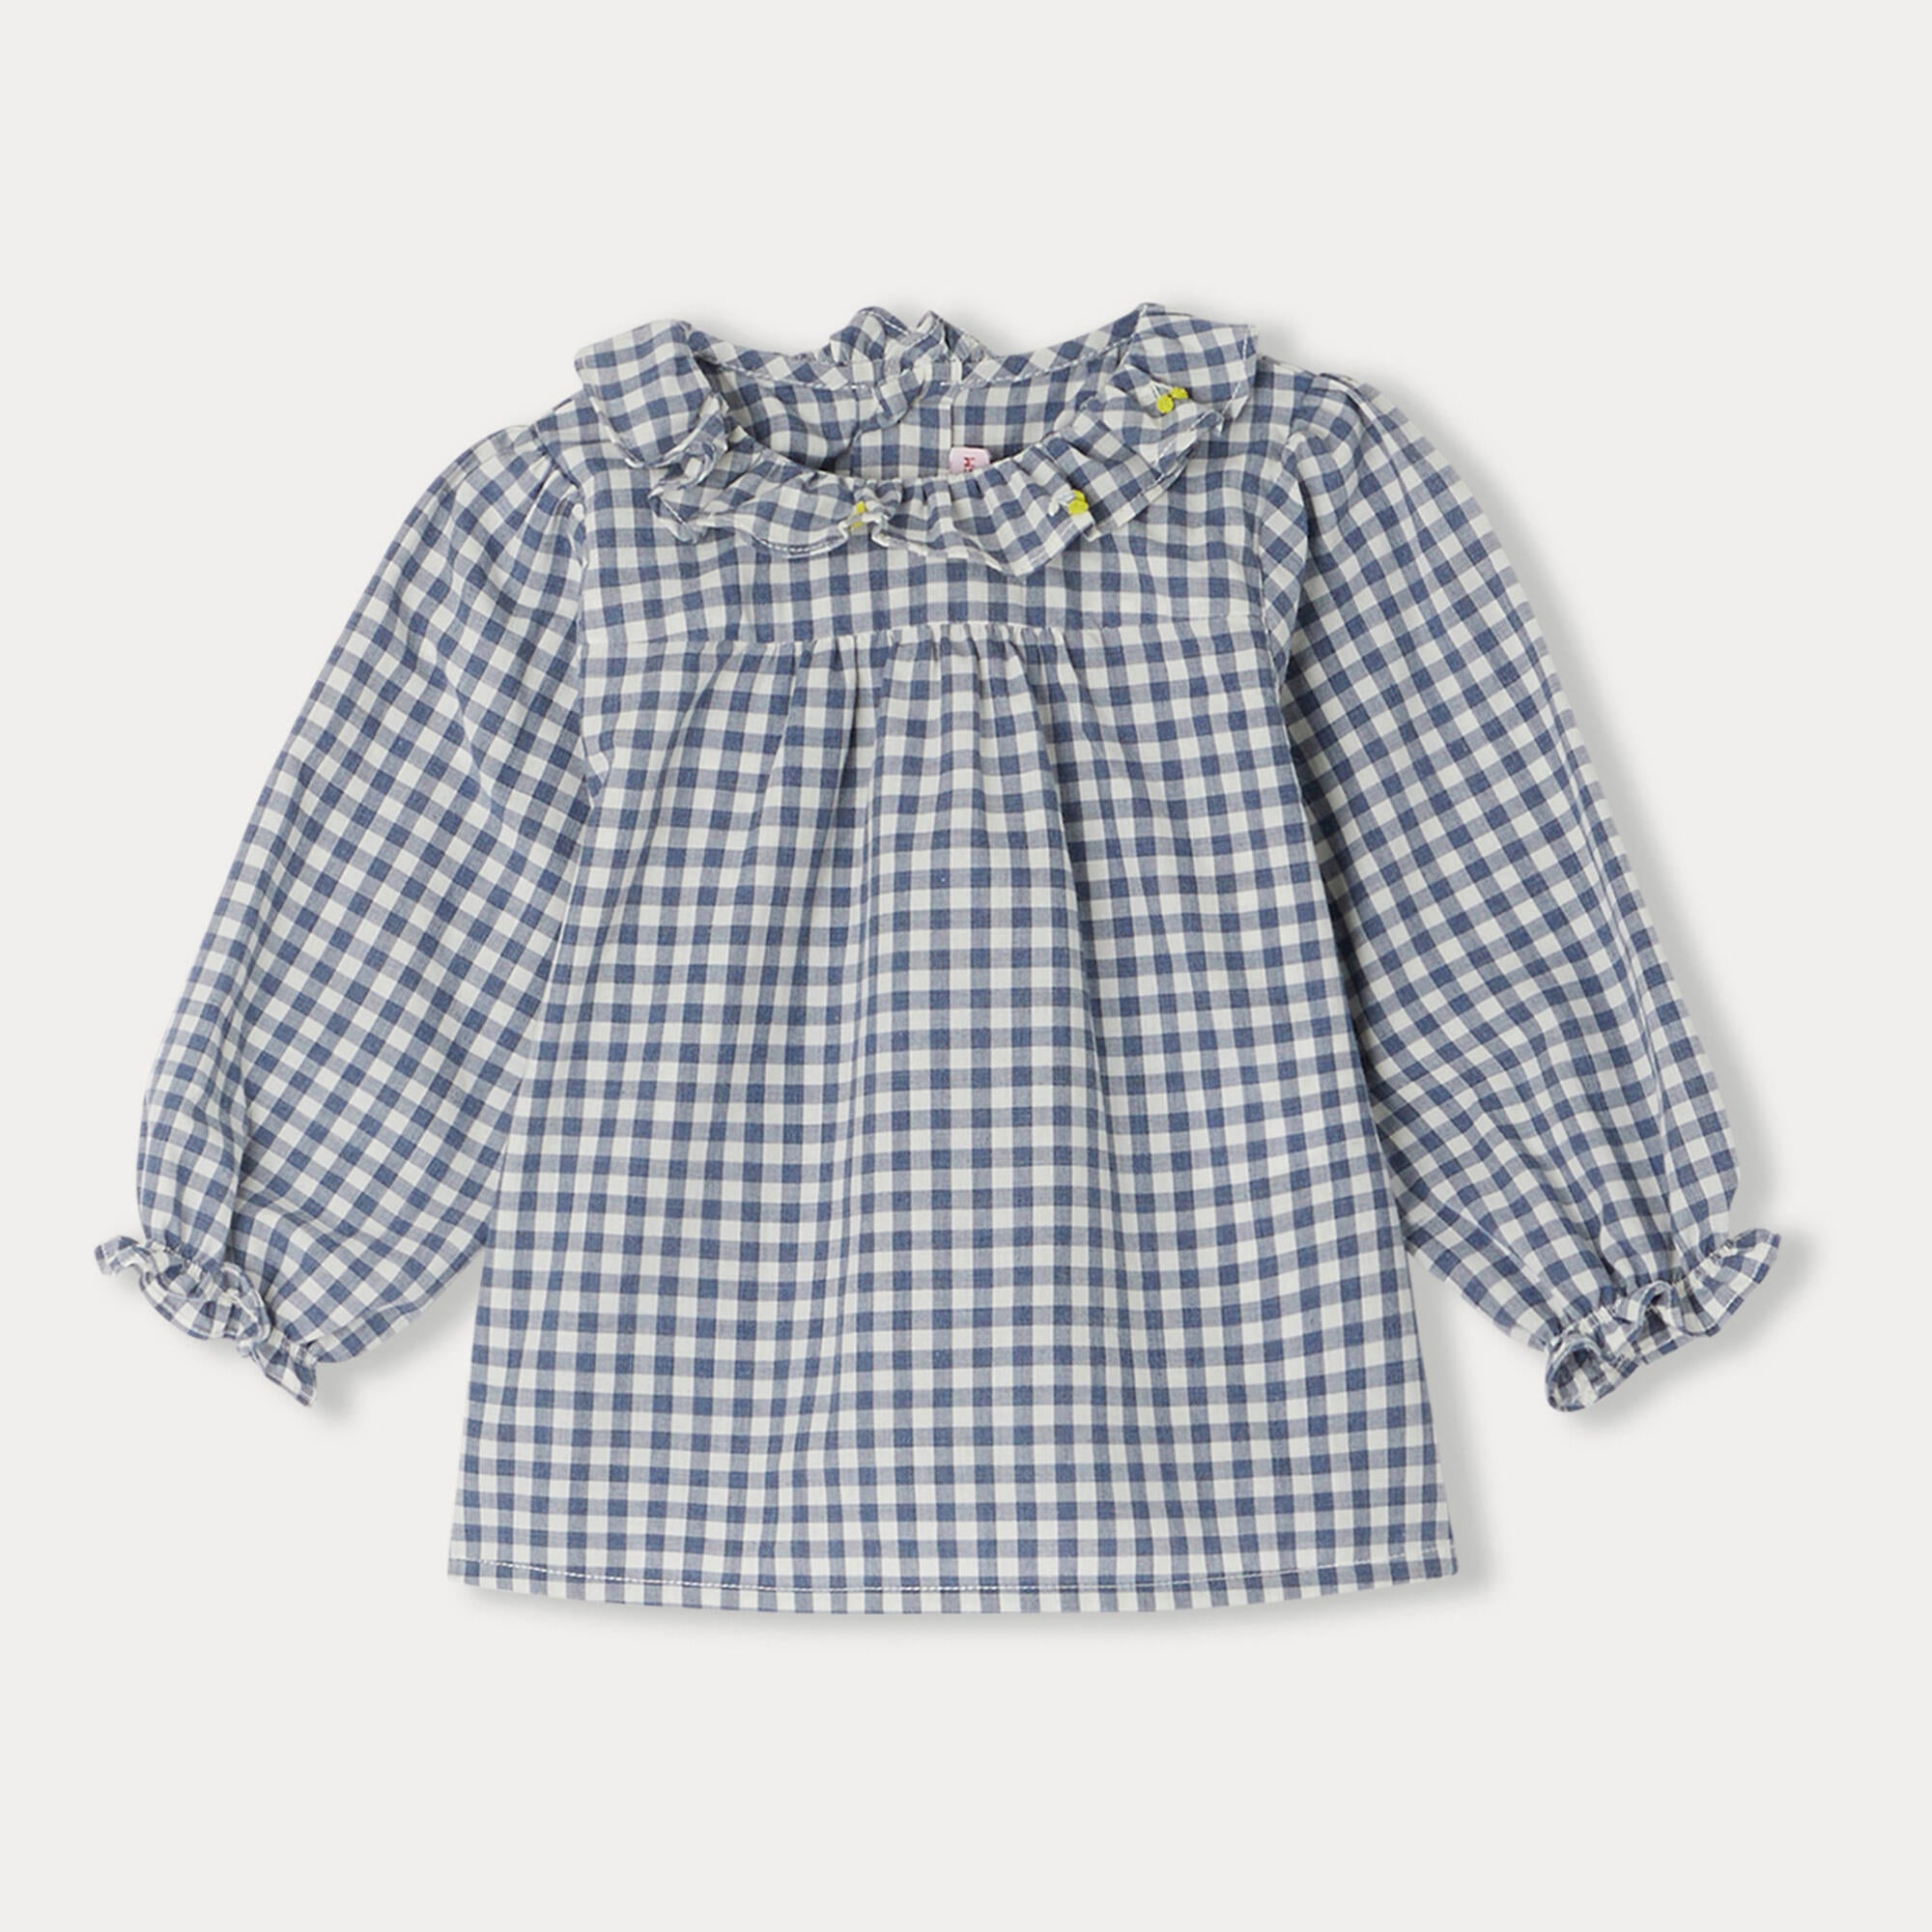 Baby Girls Grey Blue Check Cotton Top